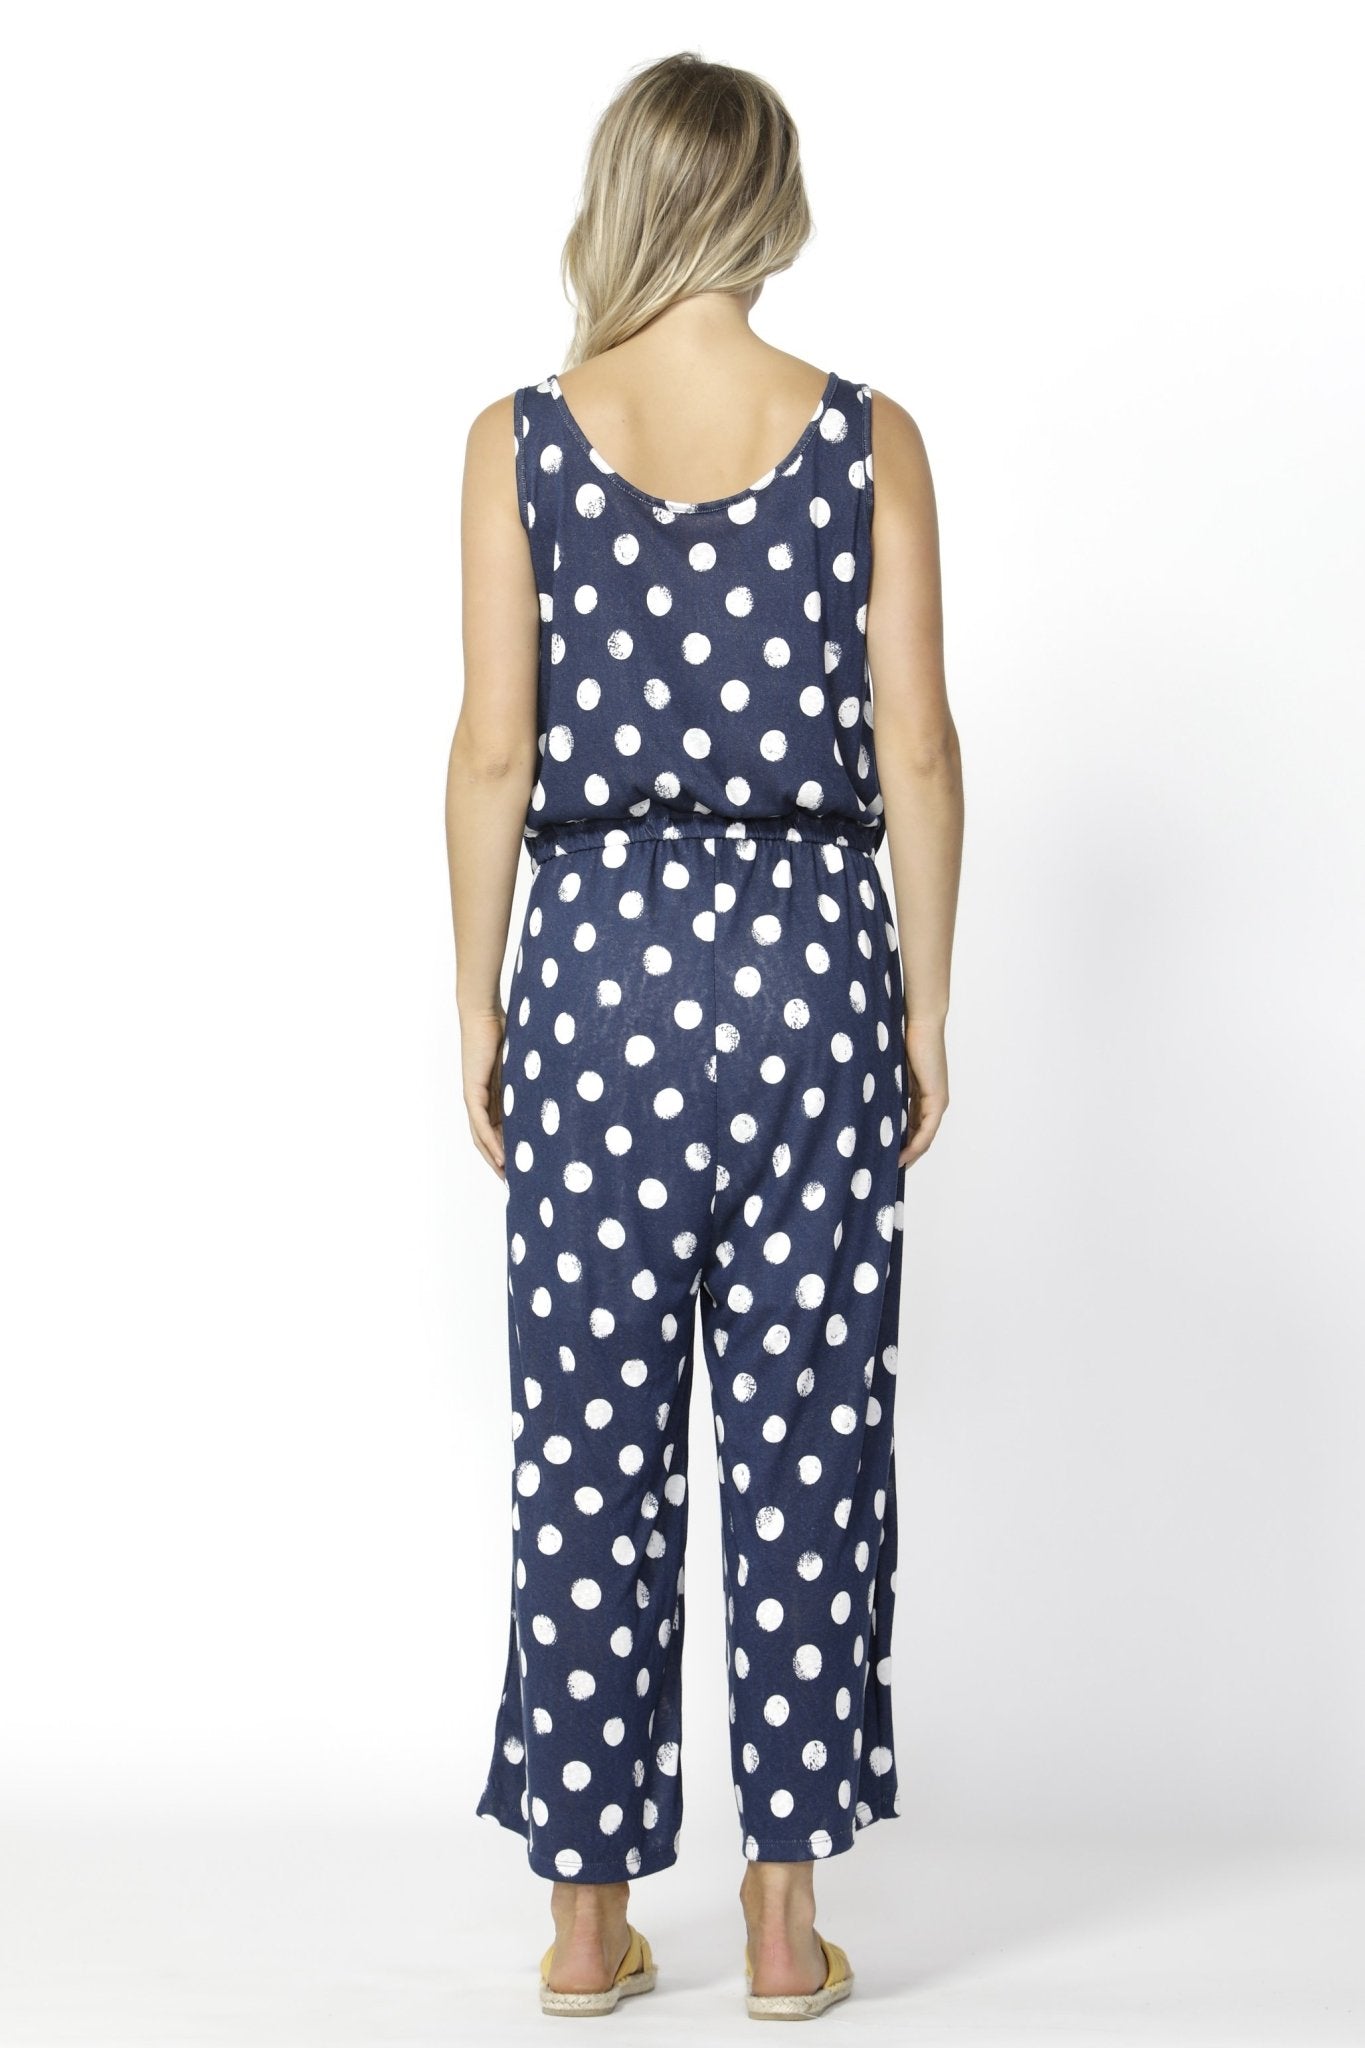 Betty Basics Maldives Jumpsuit in Ink with White Spot - Hey Sara